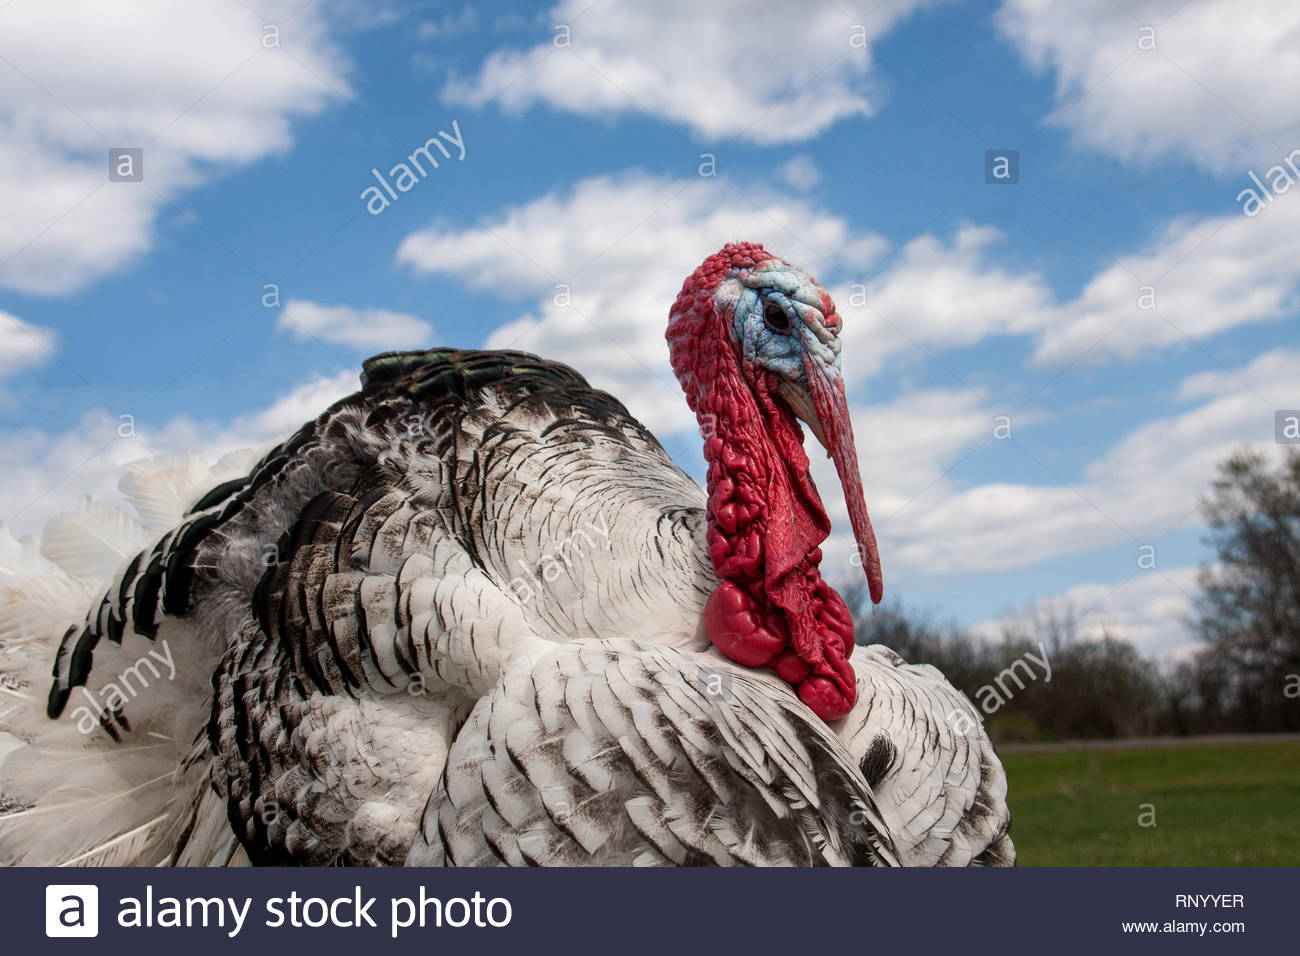 Portrait Of A Turkey Male Or Gobbler Closeup On The Blue Sky